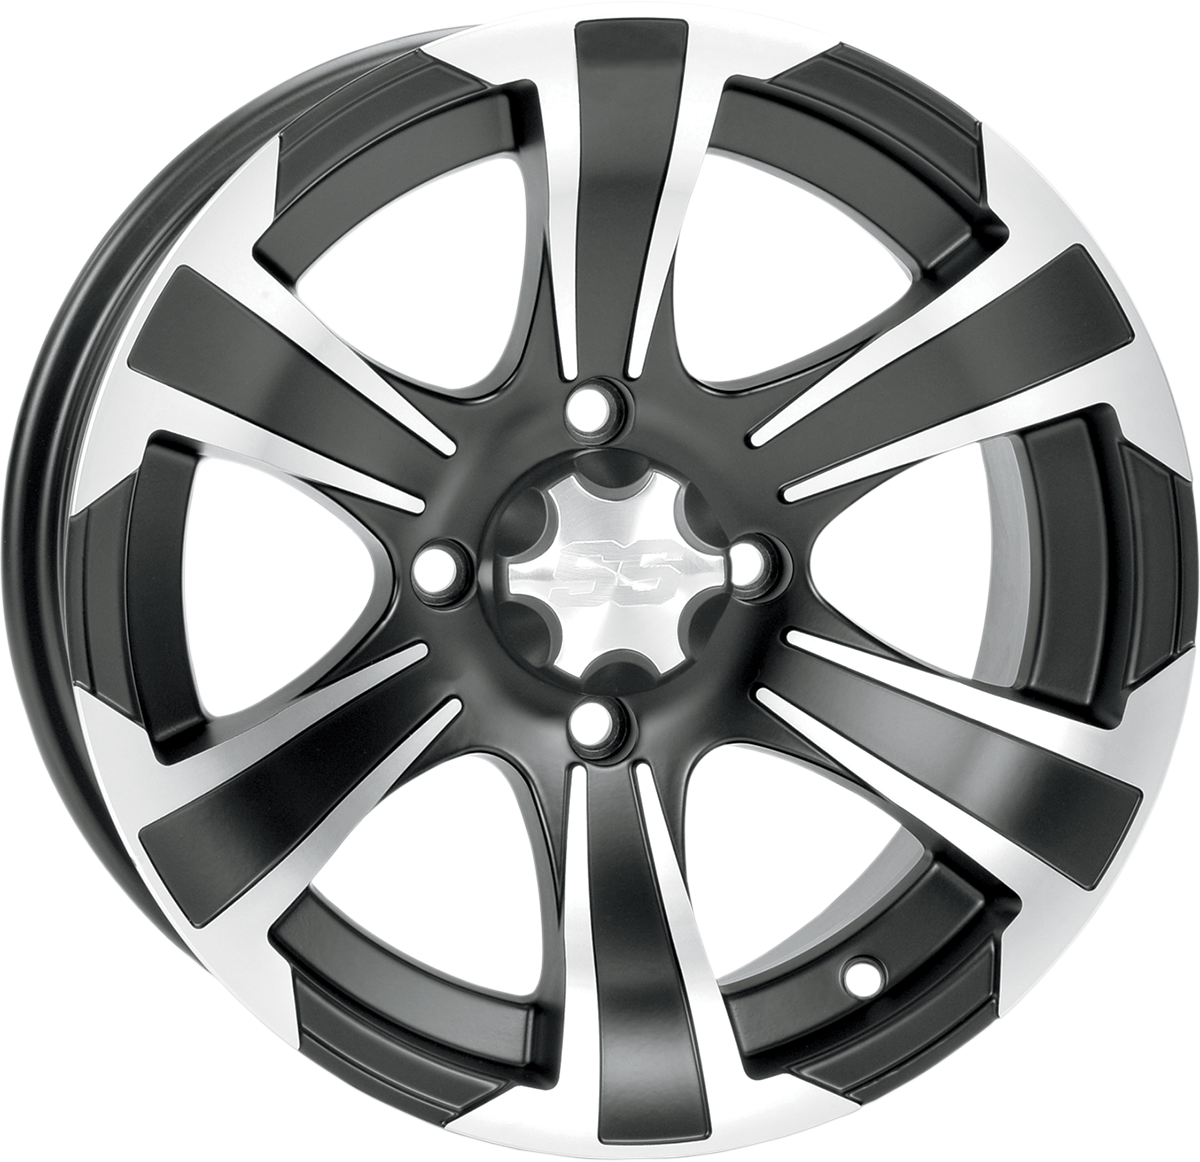 ITP SS312 Alloy Wheel - Front - Black Machined - 14x6 - 4/137 - 4+2 1428454536B